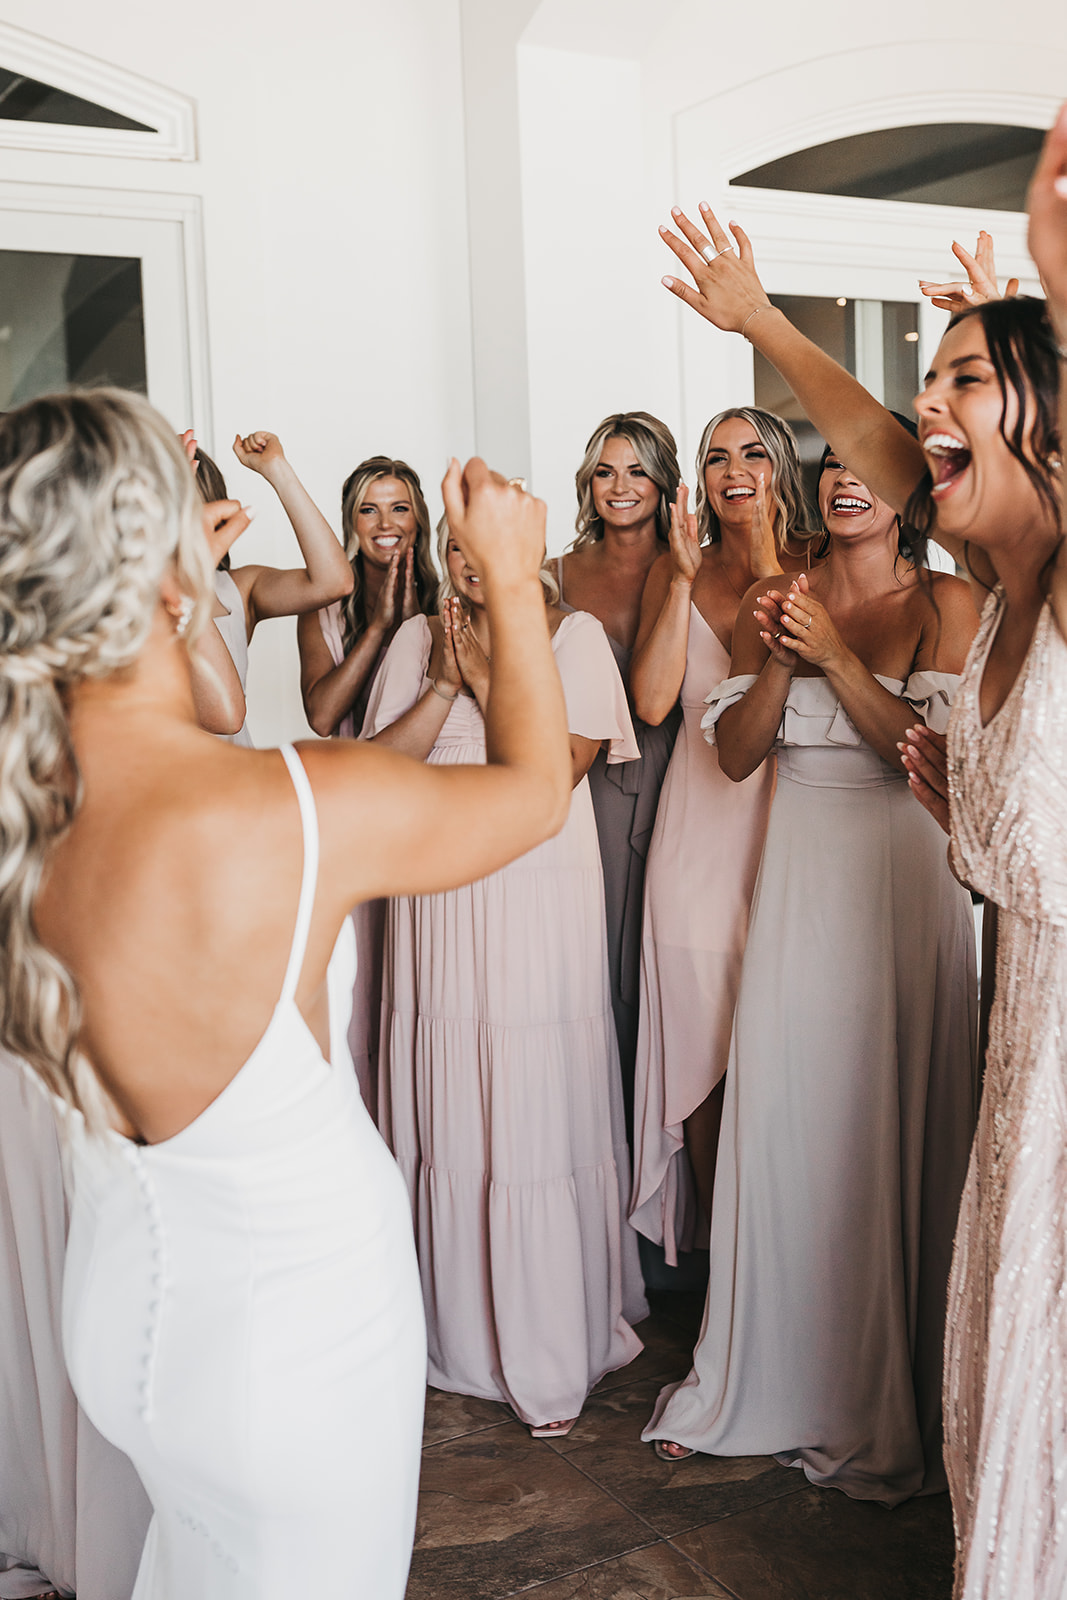 Bride and bridesmaids sharing laughs together before heading out to the wedding ceremony at winery